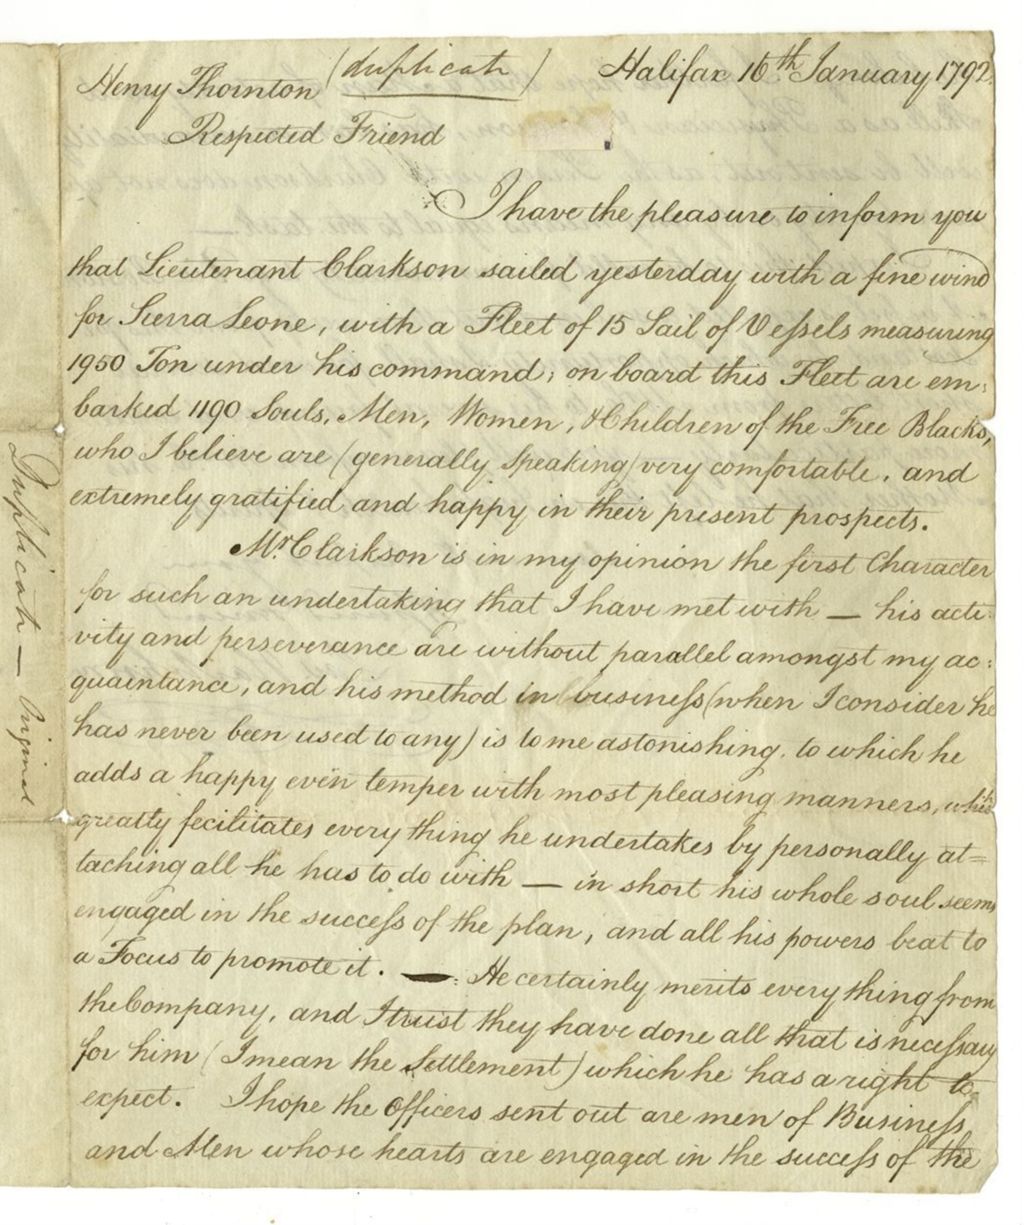 Letter from Lawrence Hartshorne to Henry Thornton